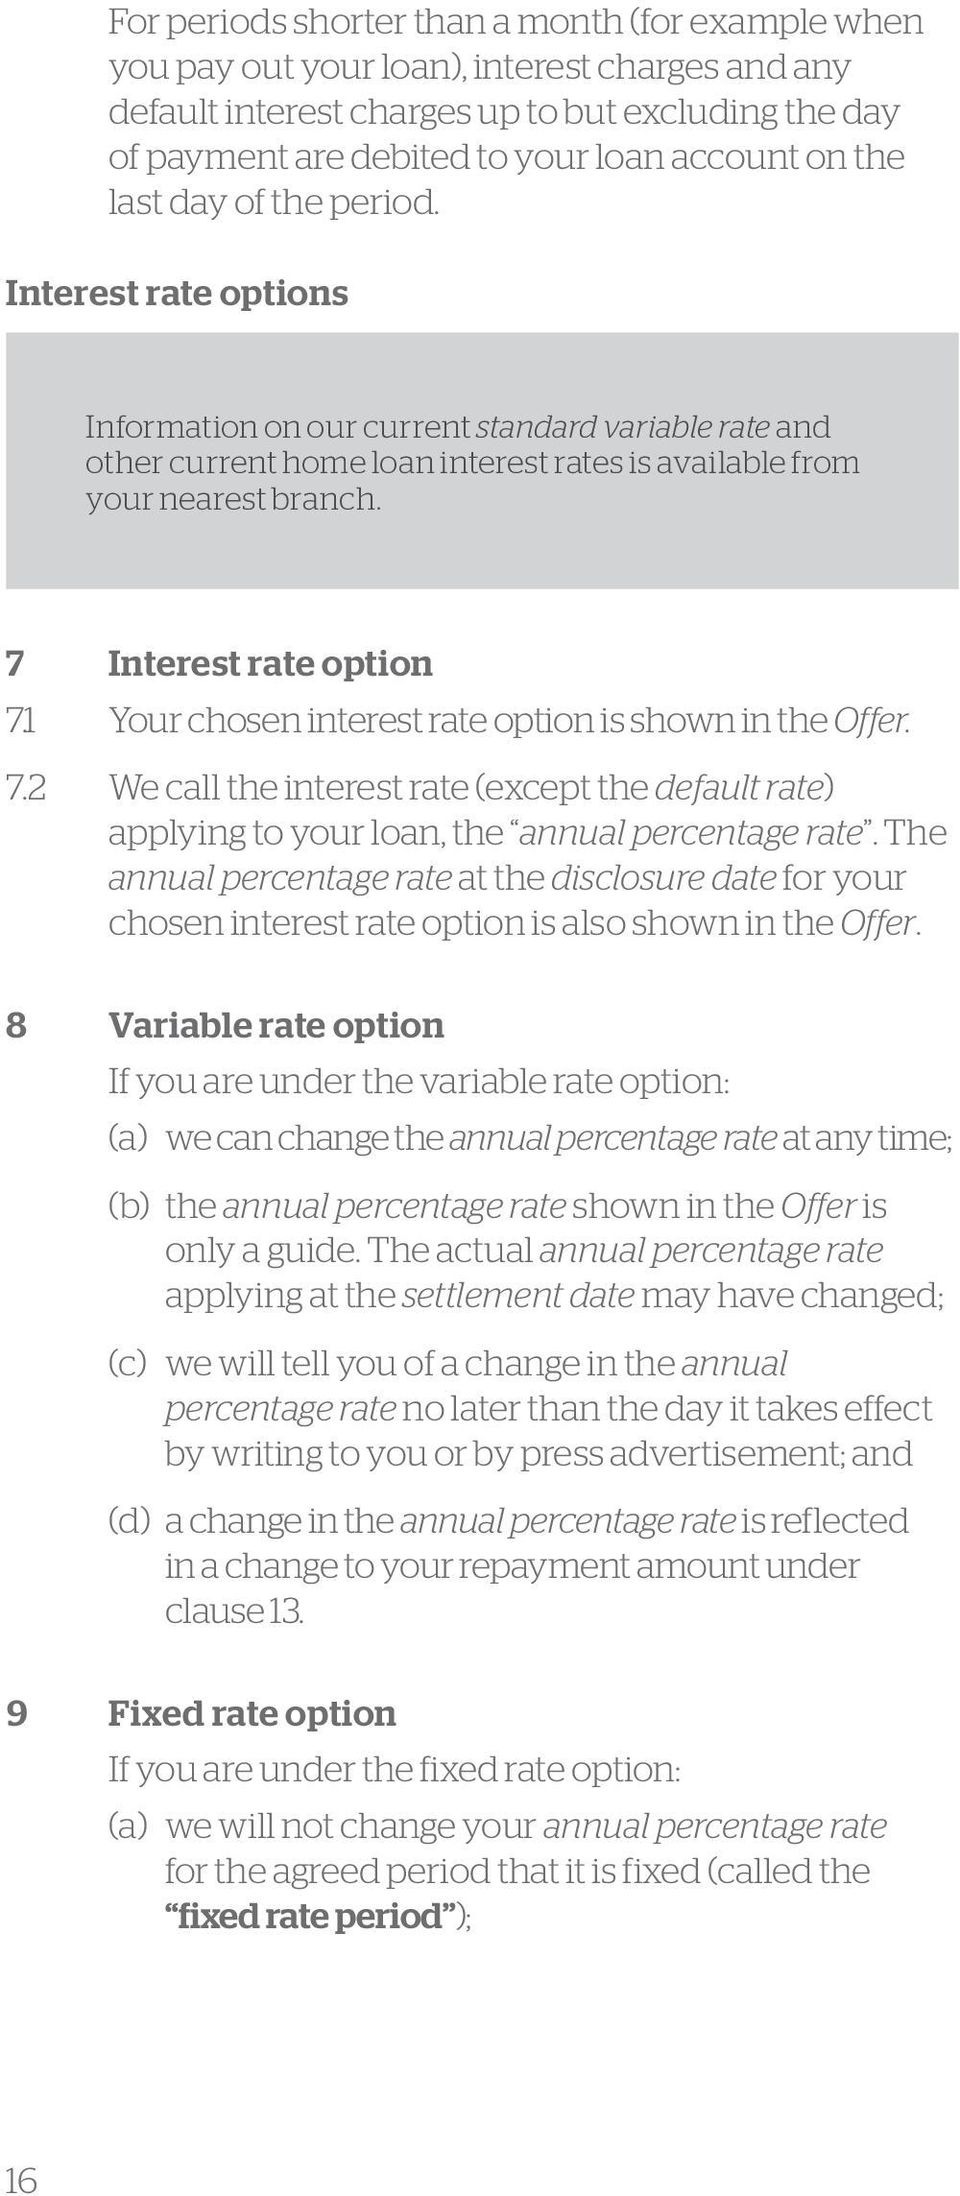 7 Interest rate option 7.1 Your chosen interest rate option is shown in the Offer. 7.2 We call the interest rate (except the default rate) applying to your loan, the annual percentage rate.